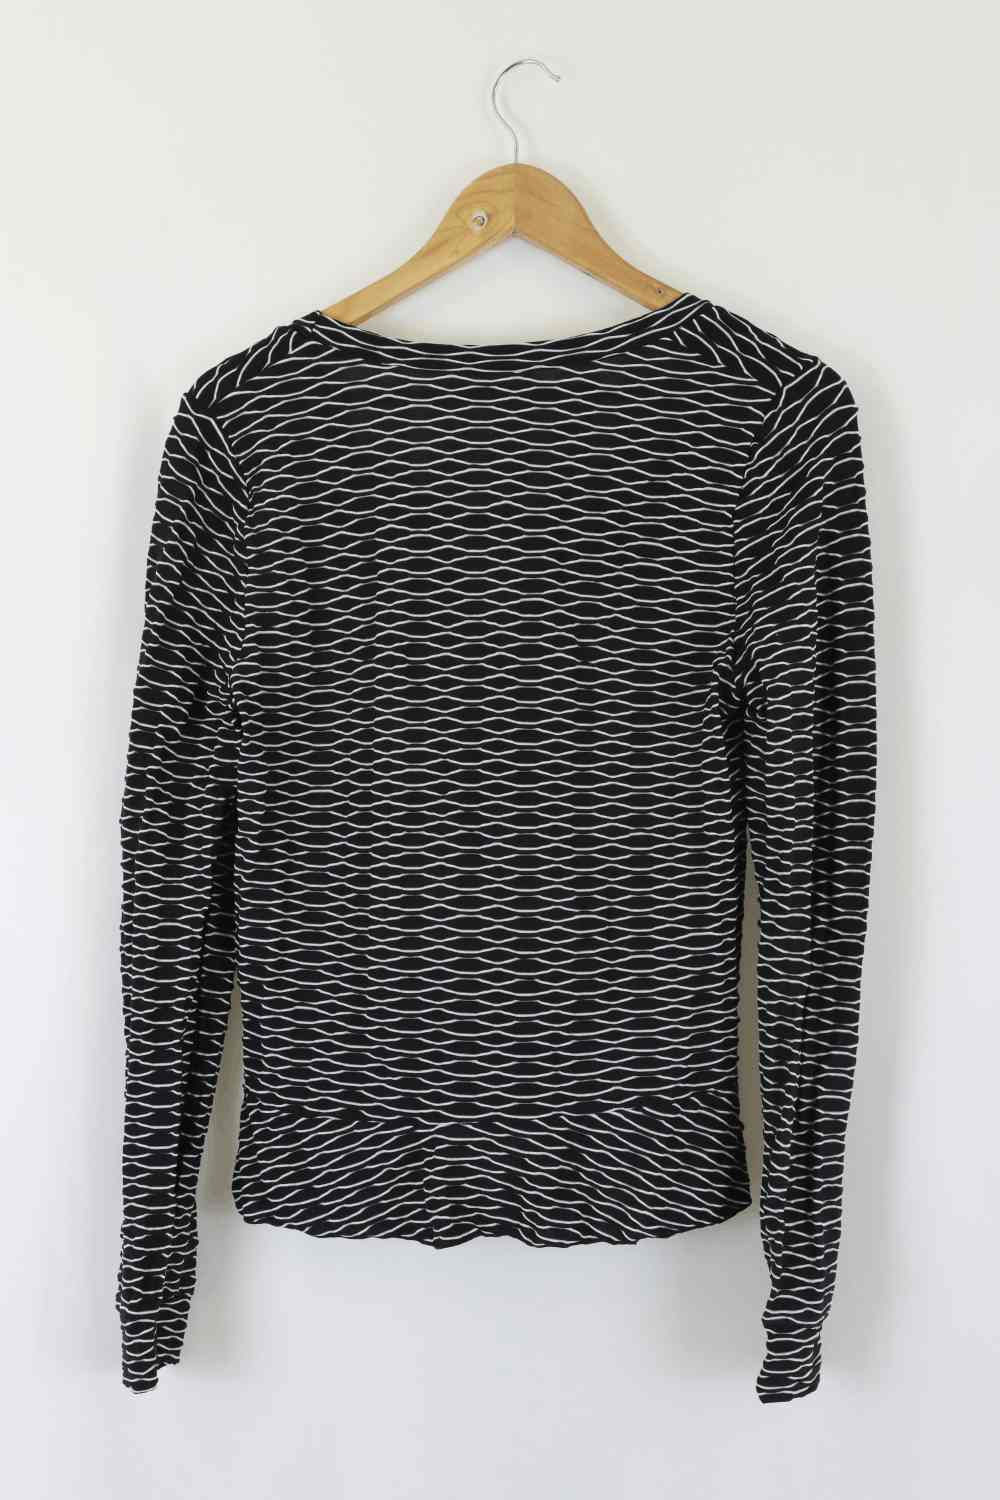 Metalicus Black And White Longsleeve Top One Size